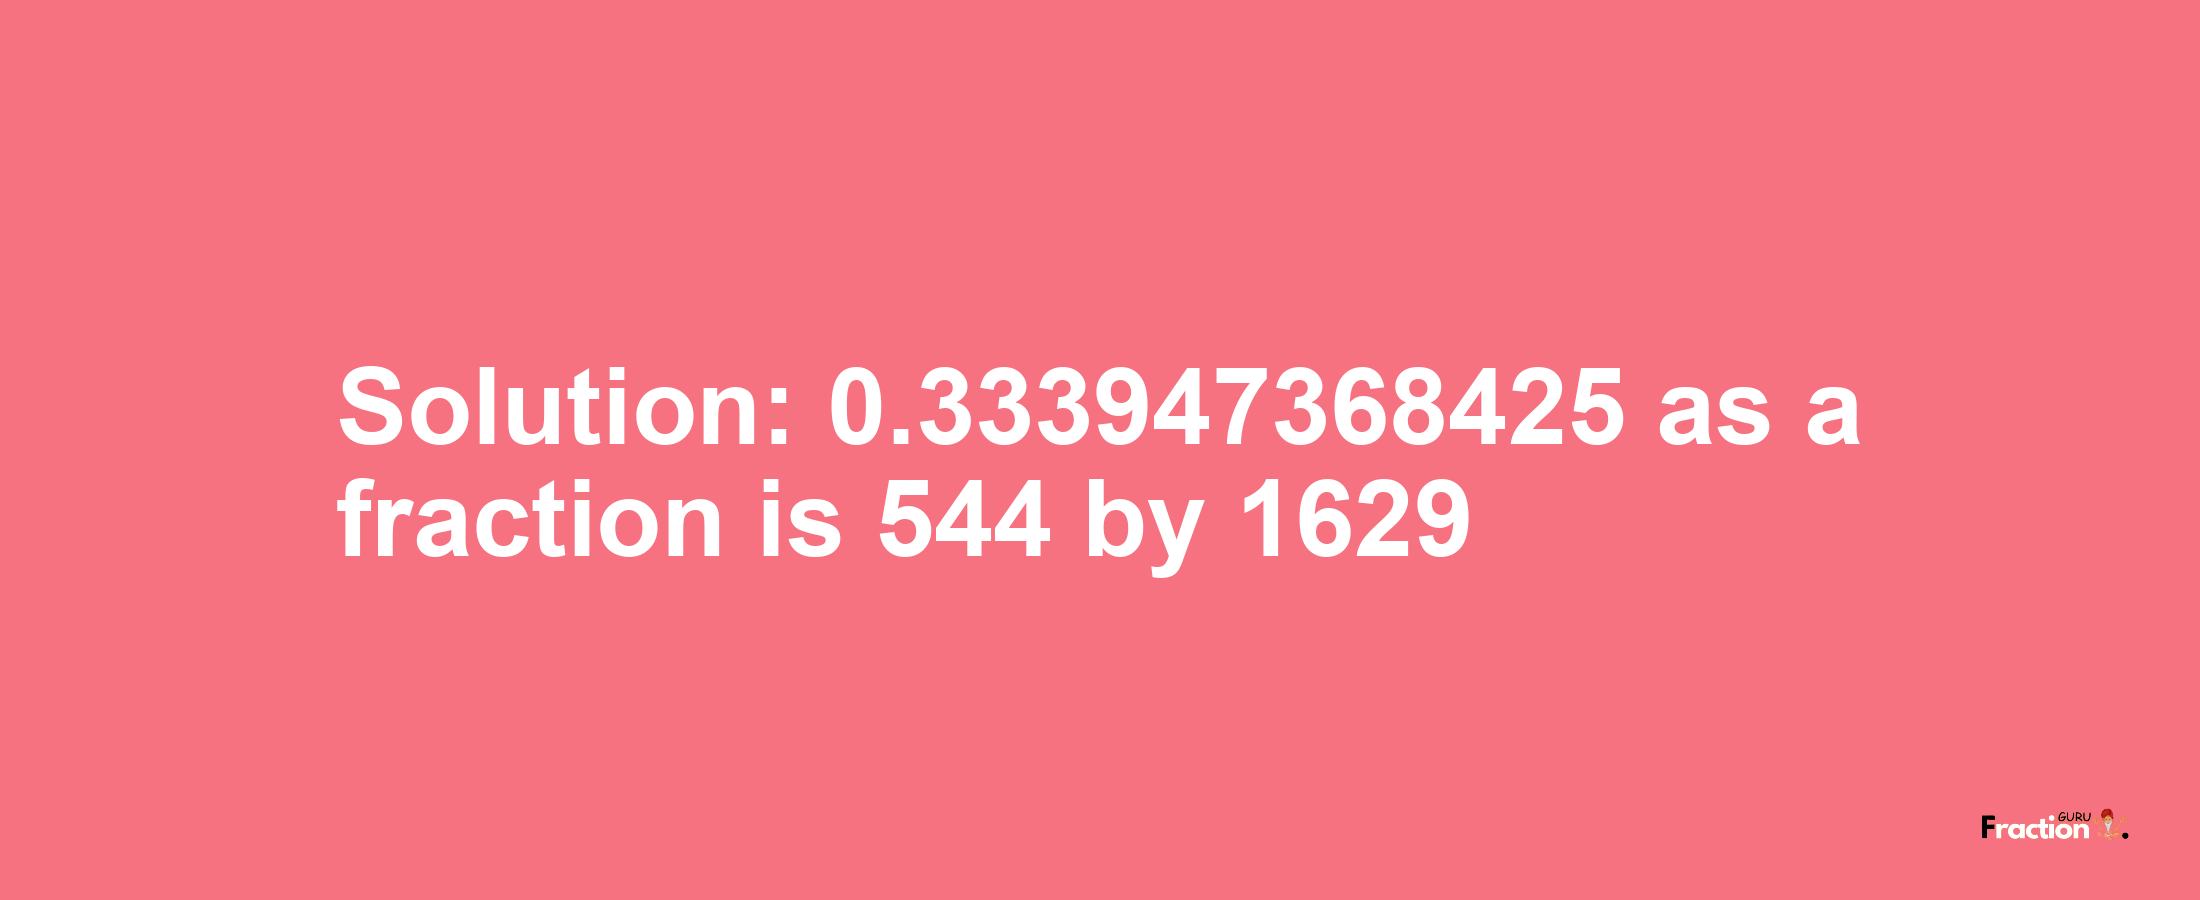 Solution:0.333947368425 as a fraction is 544/1629